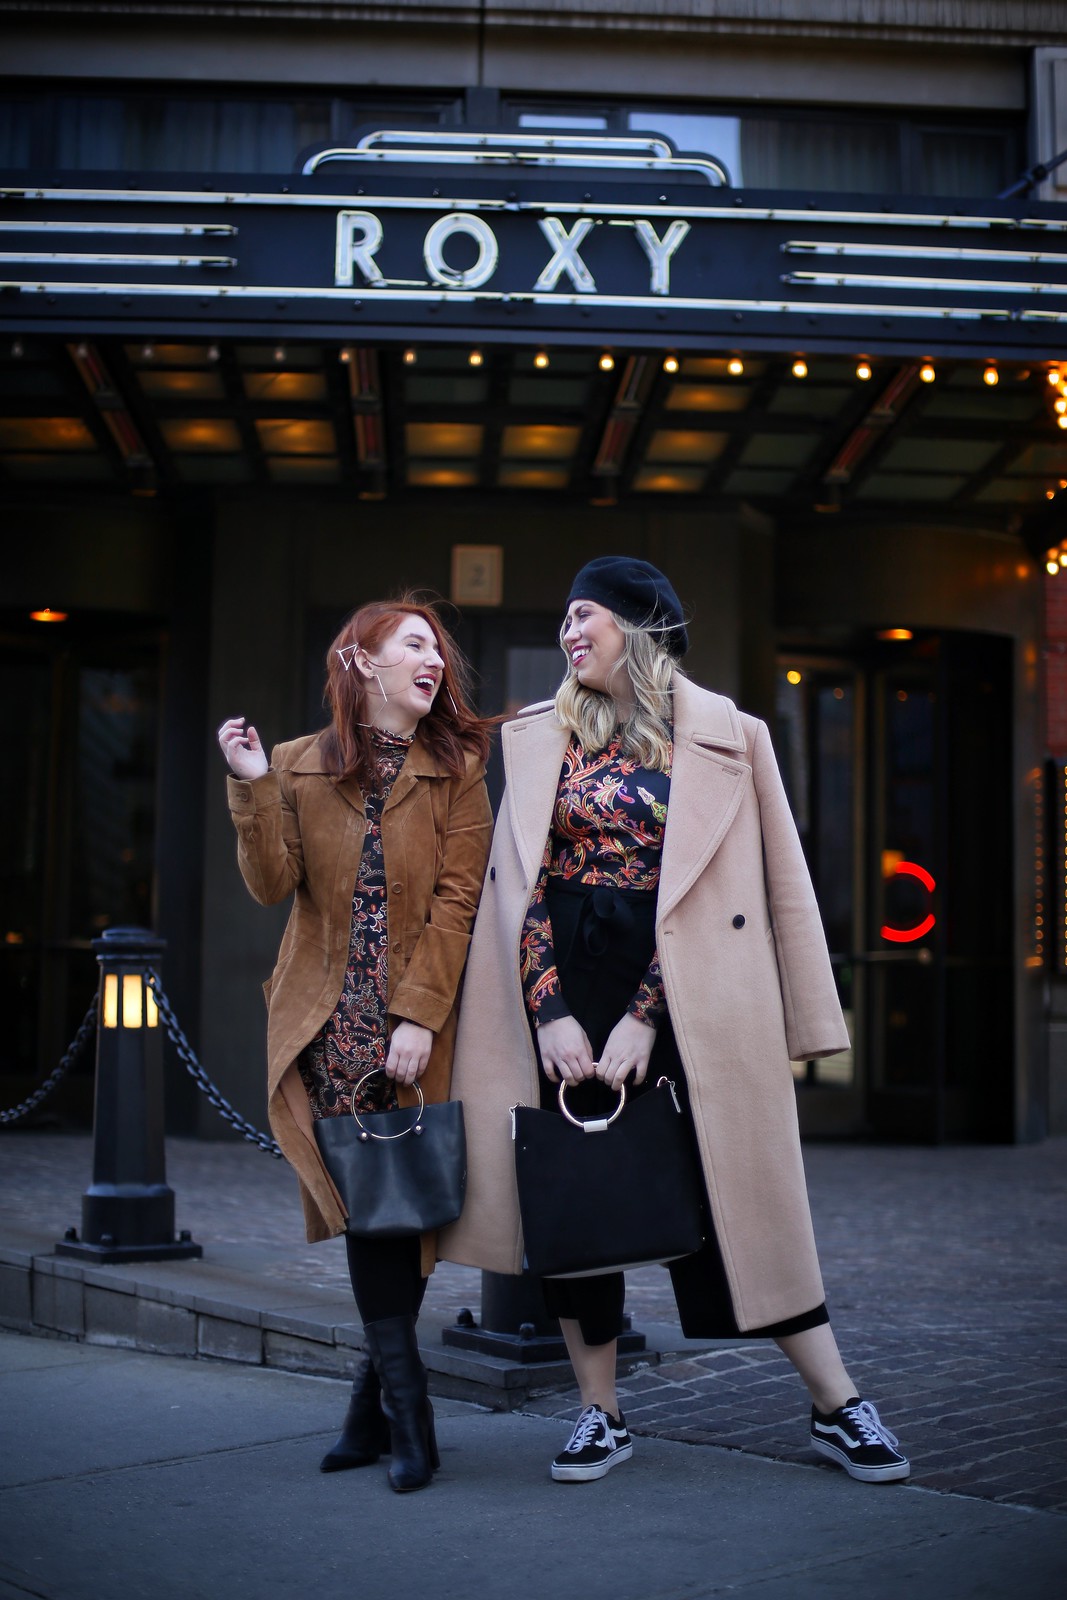 NYC Fashion Bloggers ASOS Paisley Print Winter Outfits Brown Coats Roxy Hotel Tribeca